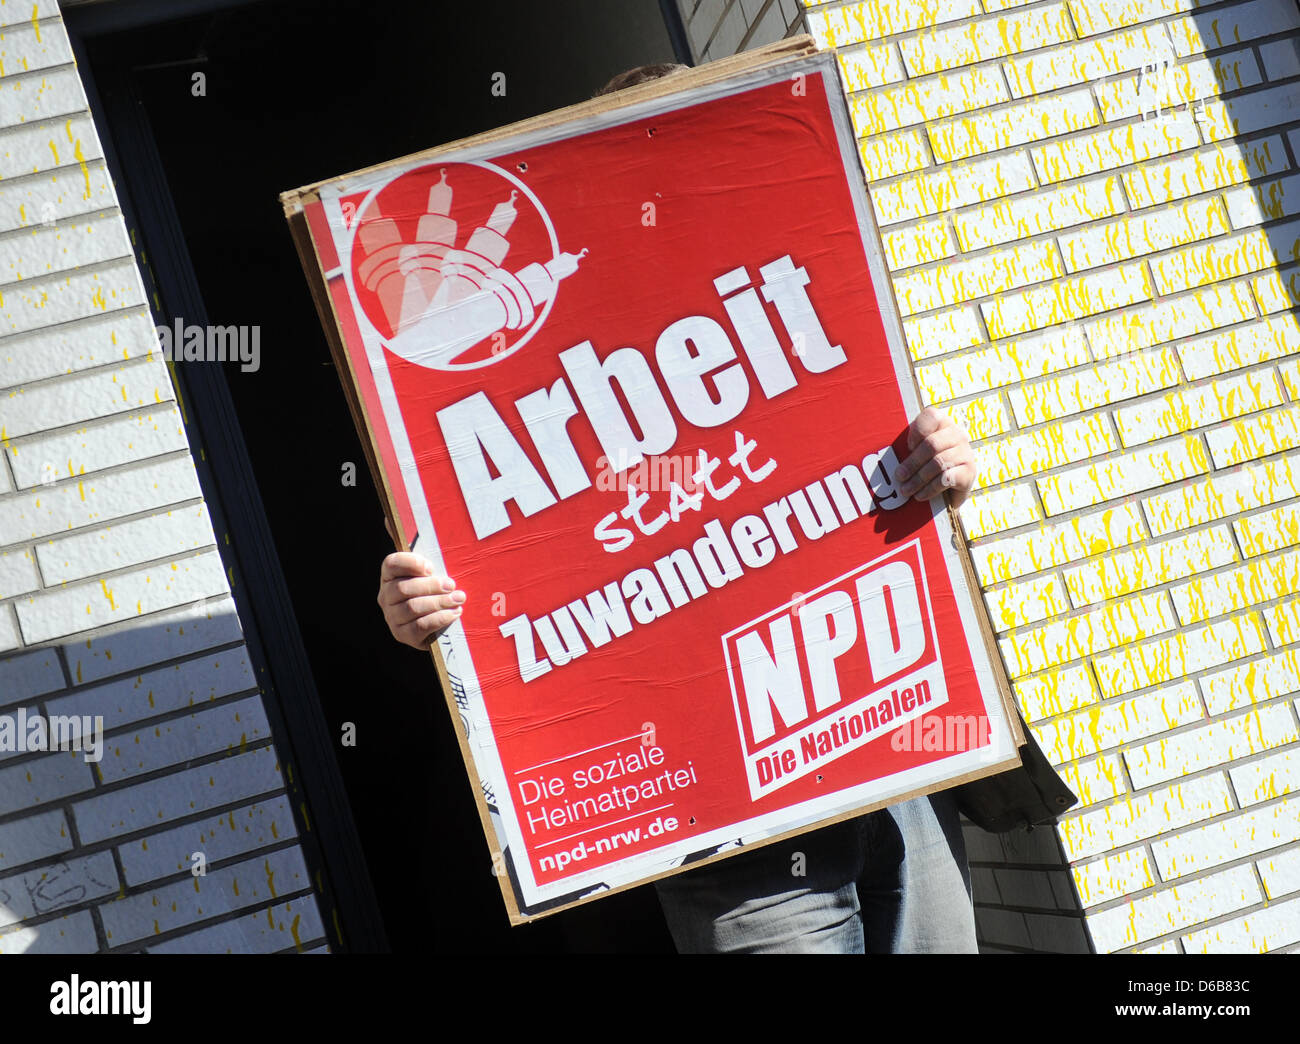 A man carries NPD (a German far-right party) posters out of a house after it was searched in Dortmund, Germany, 23 August 2012. Police were out in force after the North Rhine-Westphalian Interior Minister outlawed three right-wing extremist organizations, the 'Kameradschaft Aachener Land', the 'Nationaler Widerstand Dortmund' and the 'Kameradschaft Hamm'. Photo: CAROLINE SEIDEL Stock Photo